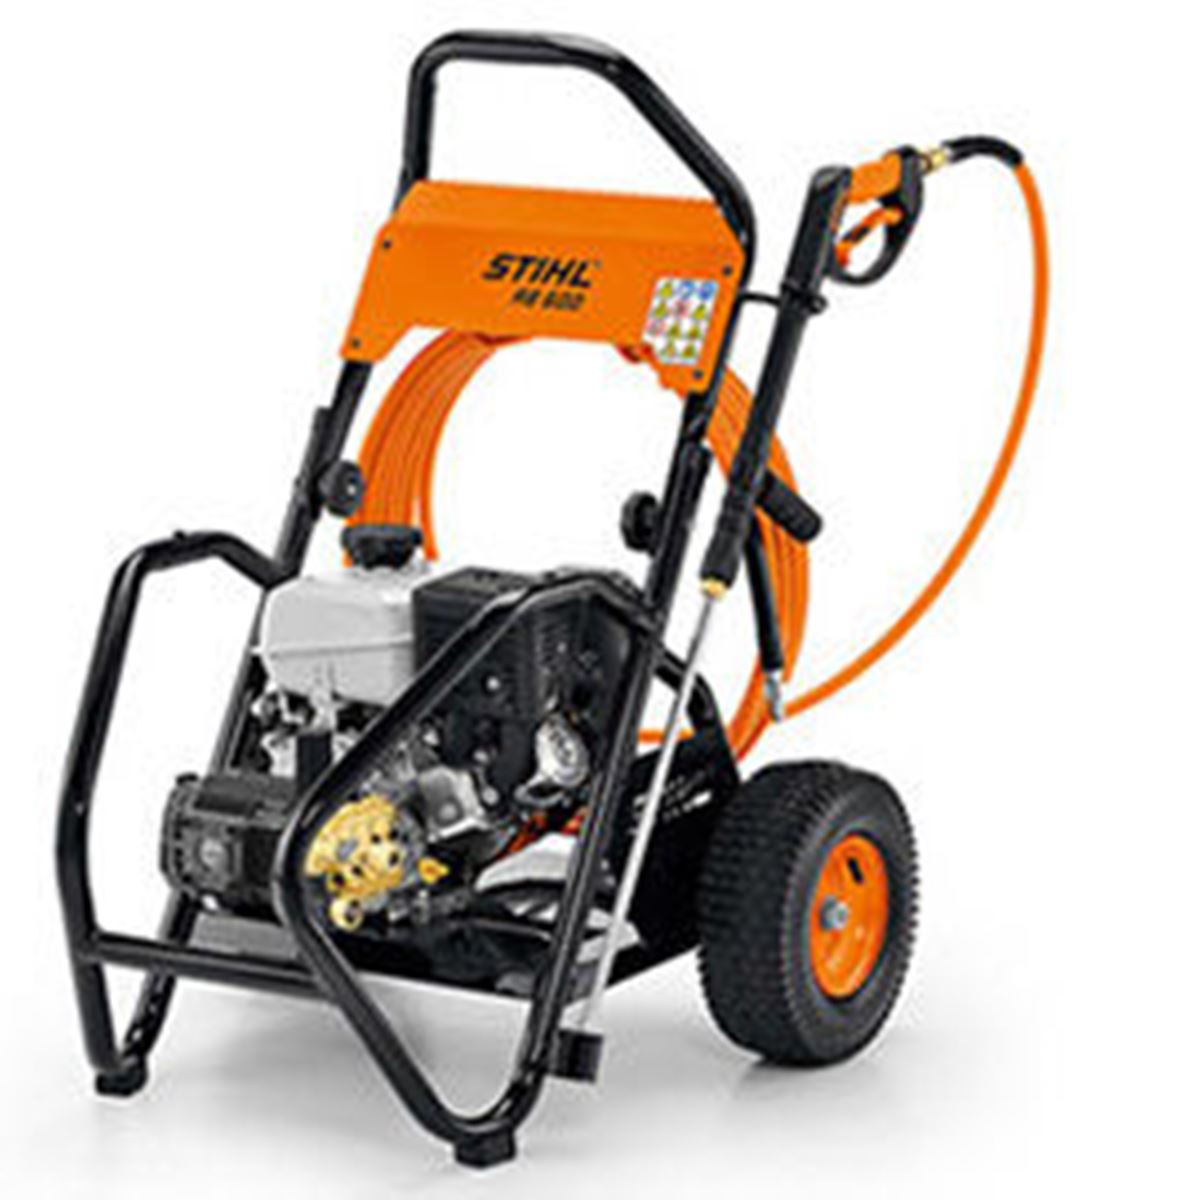 Strong 52 kW Petrol Pressure Washer RB 600